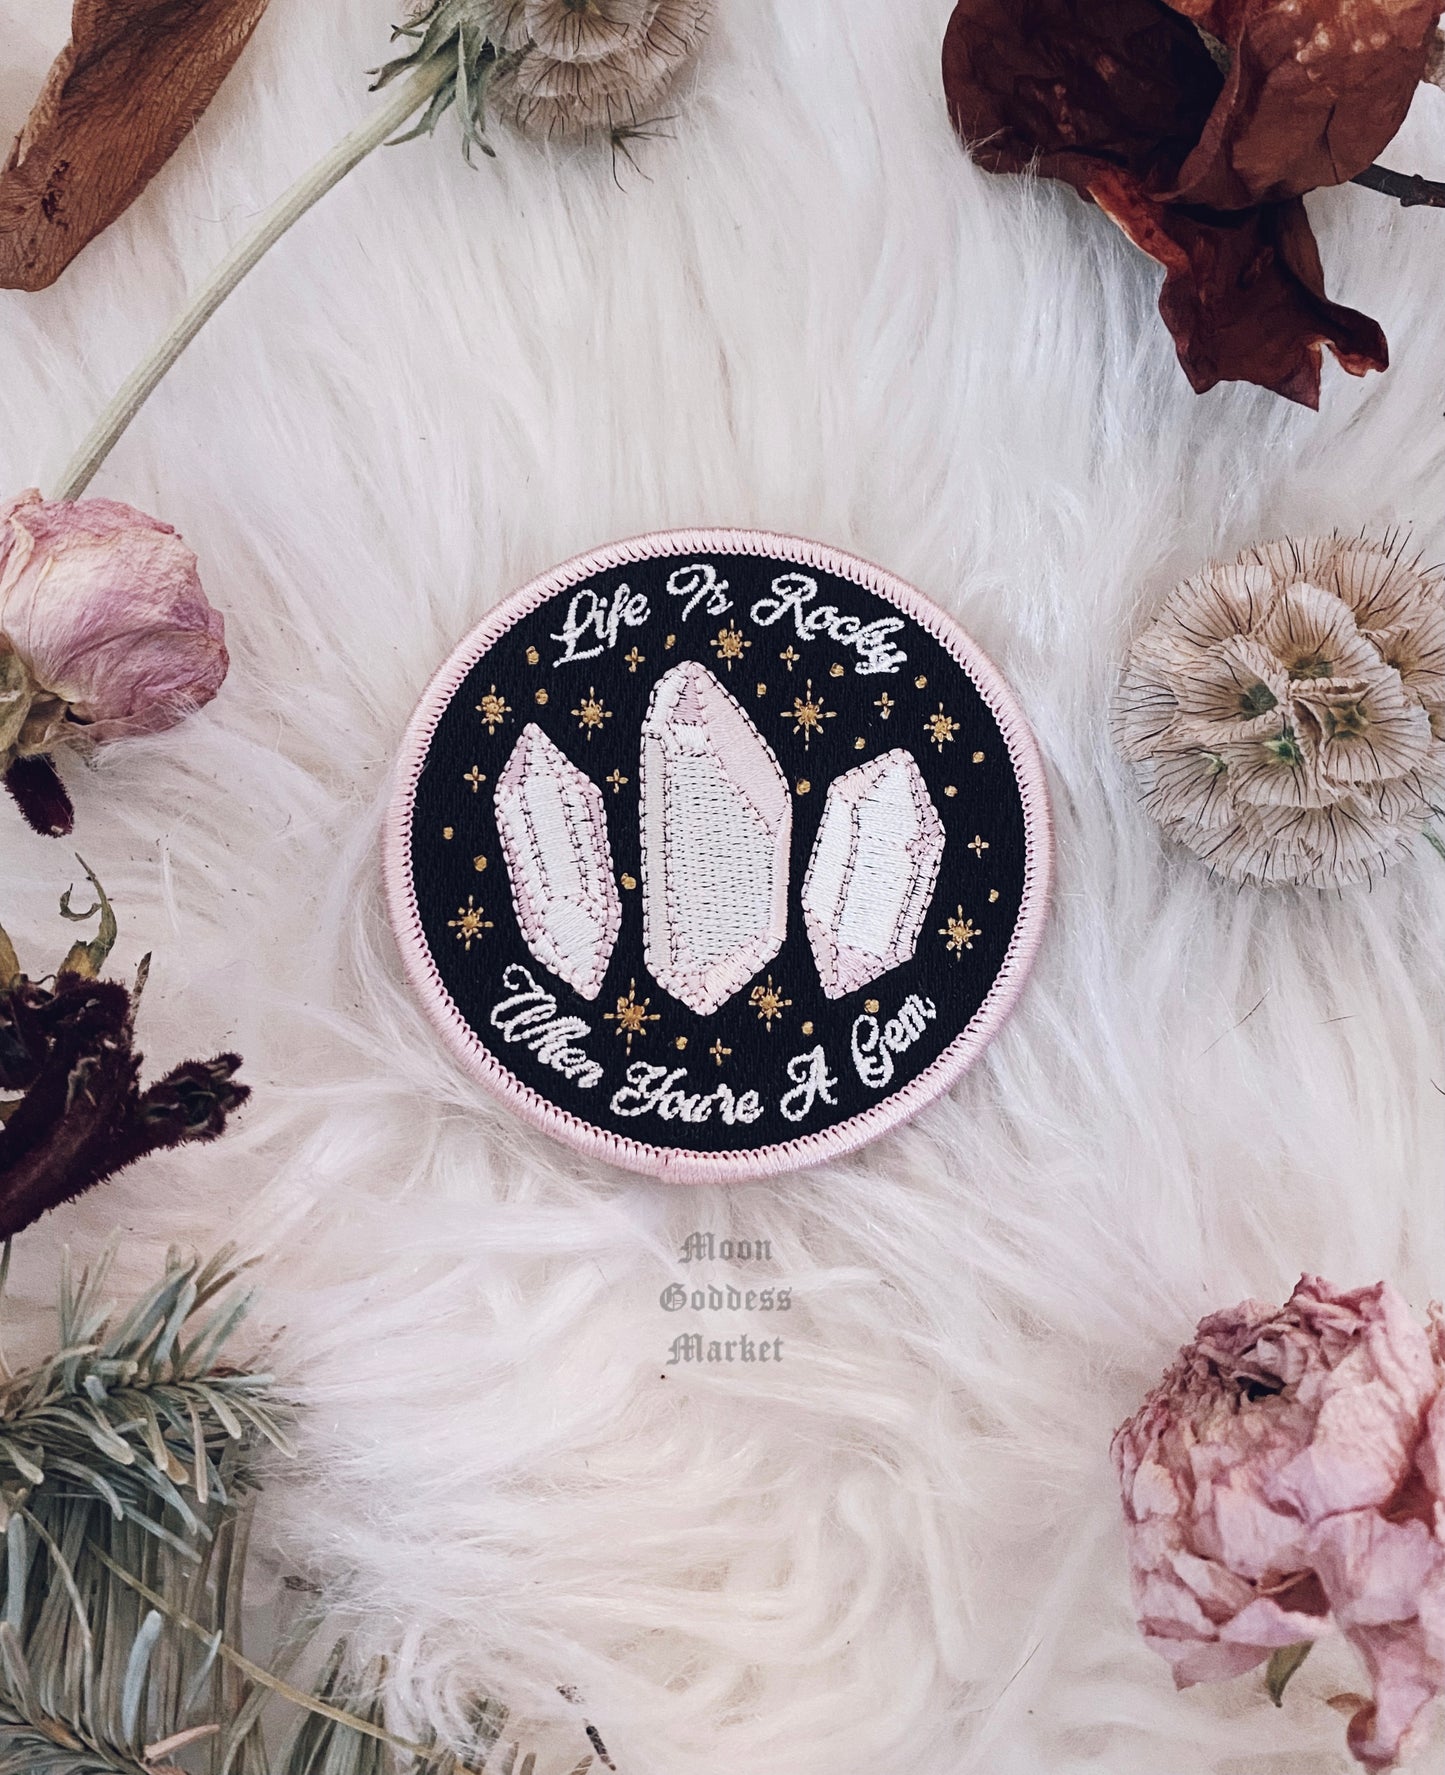 Life Is Rocky When You're A Gem Patch - Moon Goddess Market